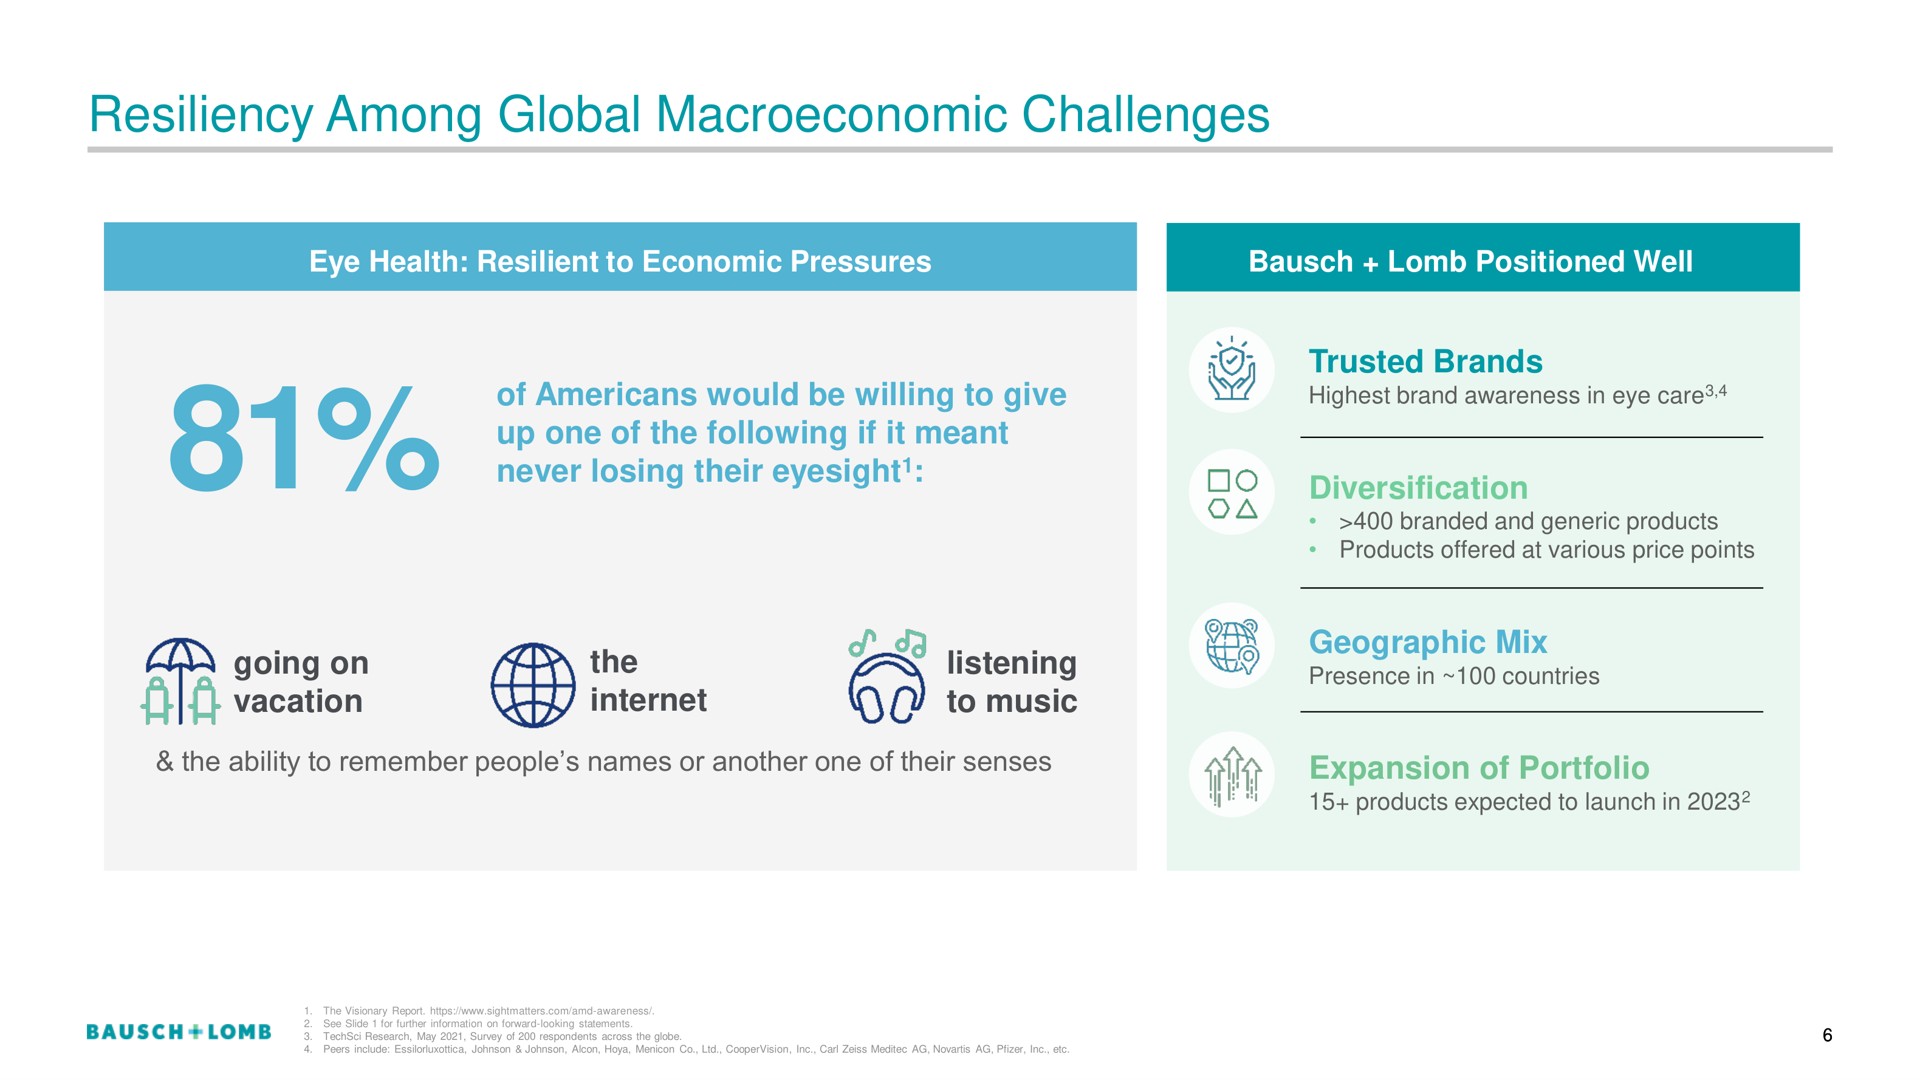 resiliency among global challenges | Bausch+Lomb